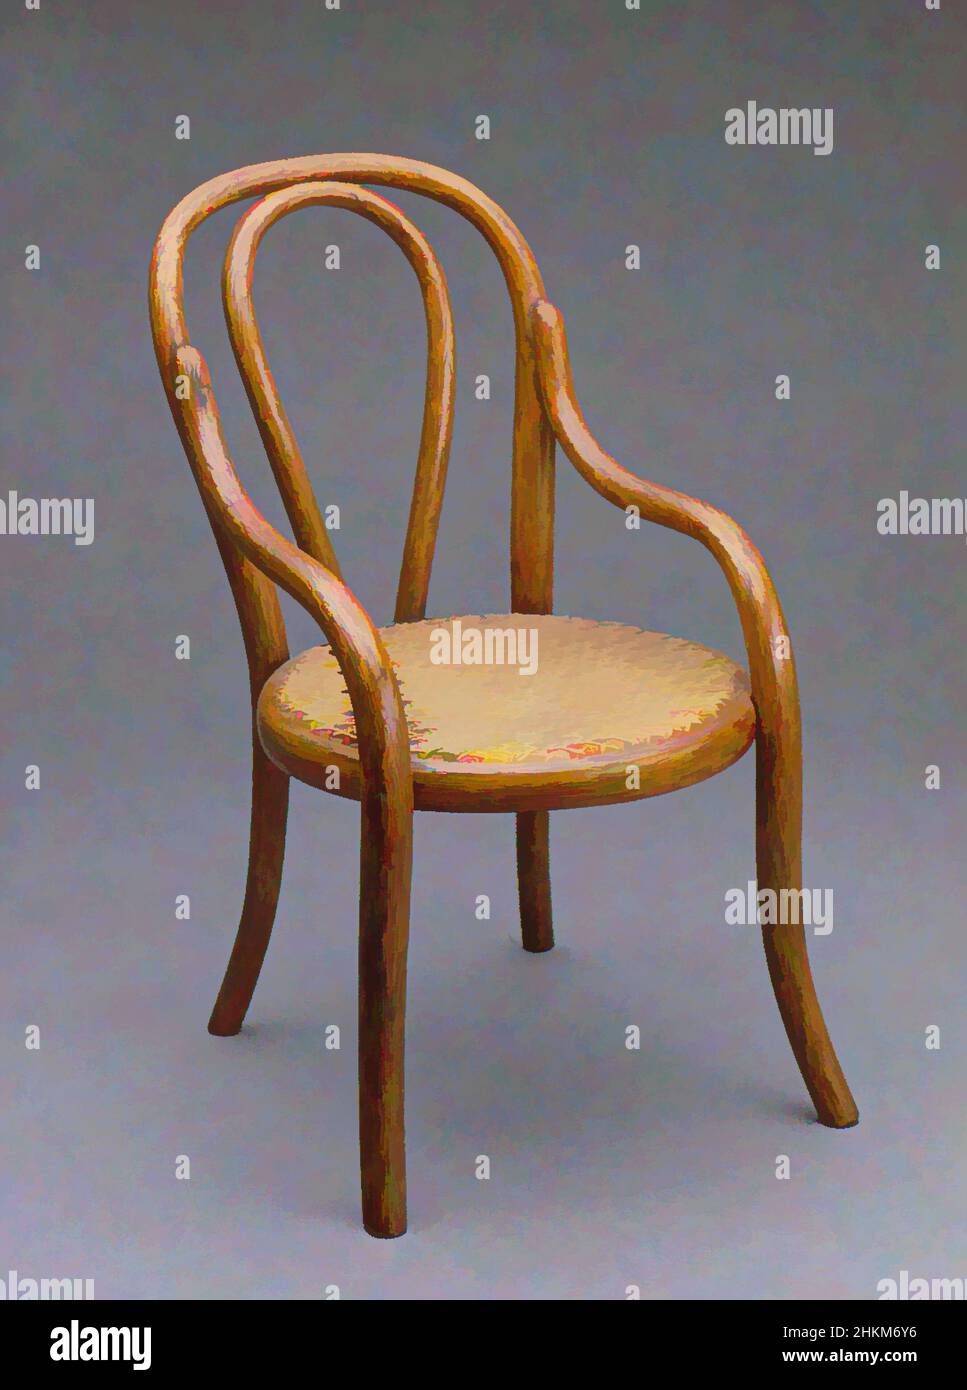 Art inspired by Doll's Chair, attributed to Gebrüder Thonet, Austria, founded 1853, designed 1885-86, made c.1890, Beech and cane, Made in Germany, Europe, Vienna, Austria, Europe, Furniture, recreational artifacts, Gallery 122, 12 3/4 x 7 1/4 x 9 1/4 in. (32.4 x 18.4 x 23.5 cm, Classic works modernized by Artotop with a splash of modernity. Shapes, color and value, eye-catching visual impact on art. Emotions through freedom of artworks in a contemporary way. A timeless message pursuing a wildly creative new direction. Artists turning to the digital medium and creating the Artotop NFT Stock Photo